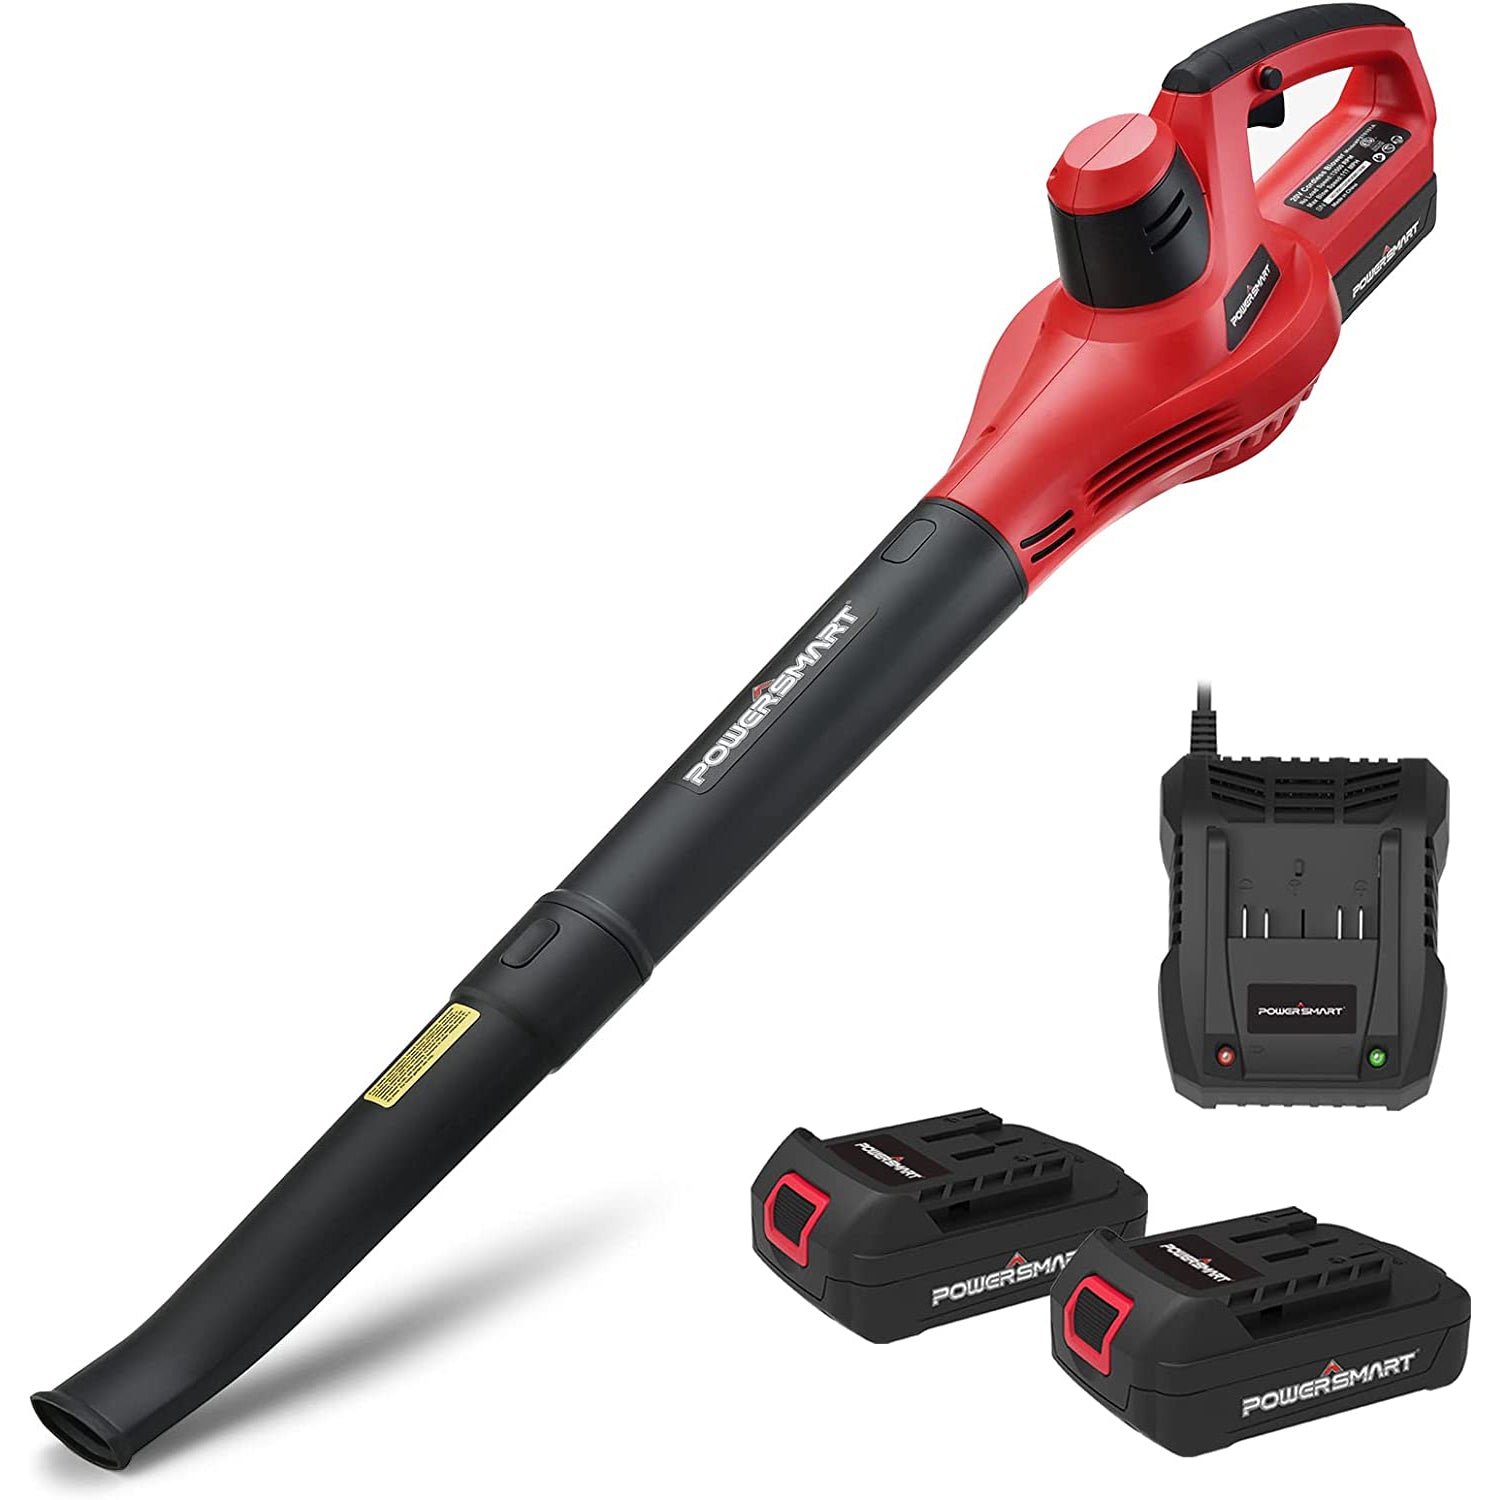 Powersmart Ps76101a-2b 20V Lithium-Ion Cordless Blower Two 1.5 Ah Batteries and Charger Included